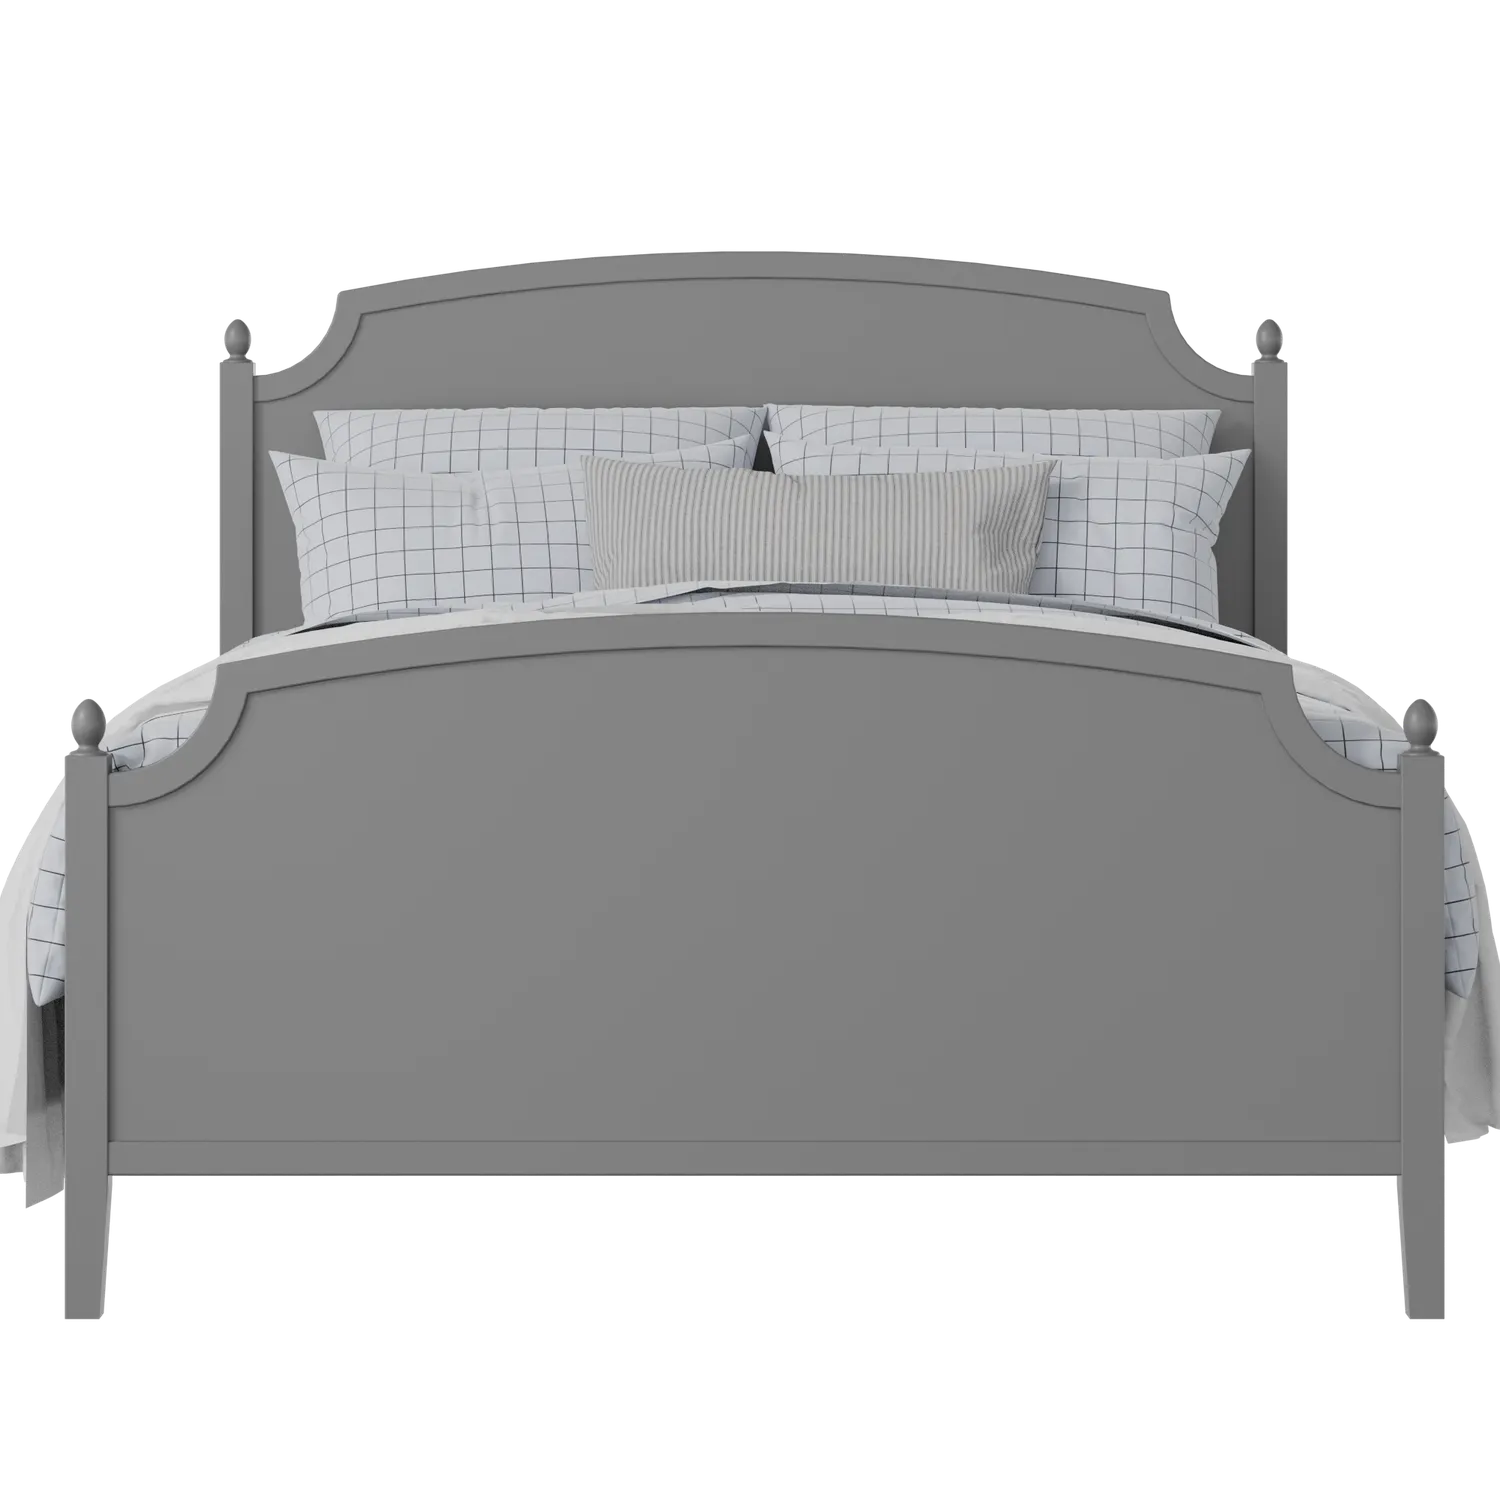 Kipling painted wood bed in grey with Juno mattress